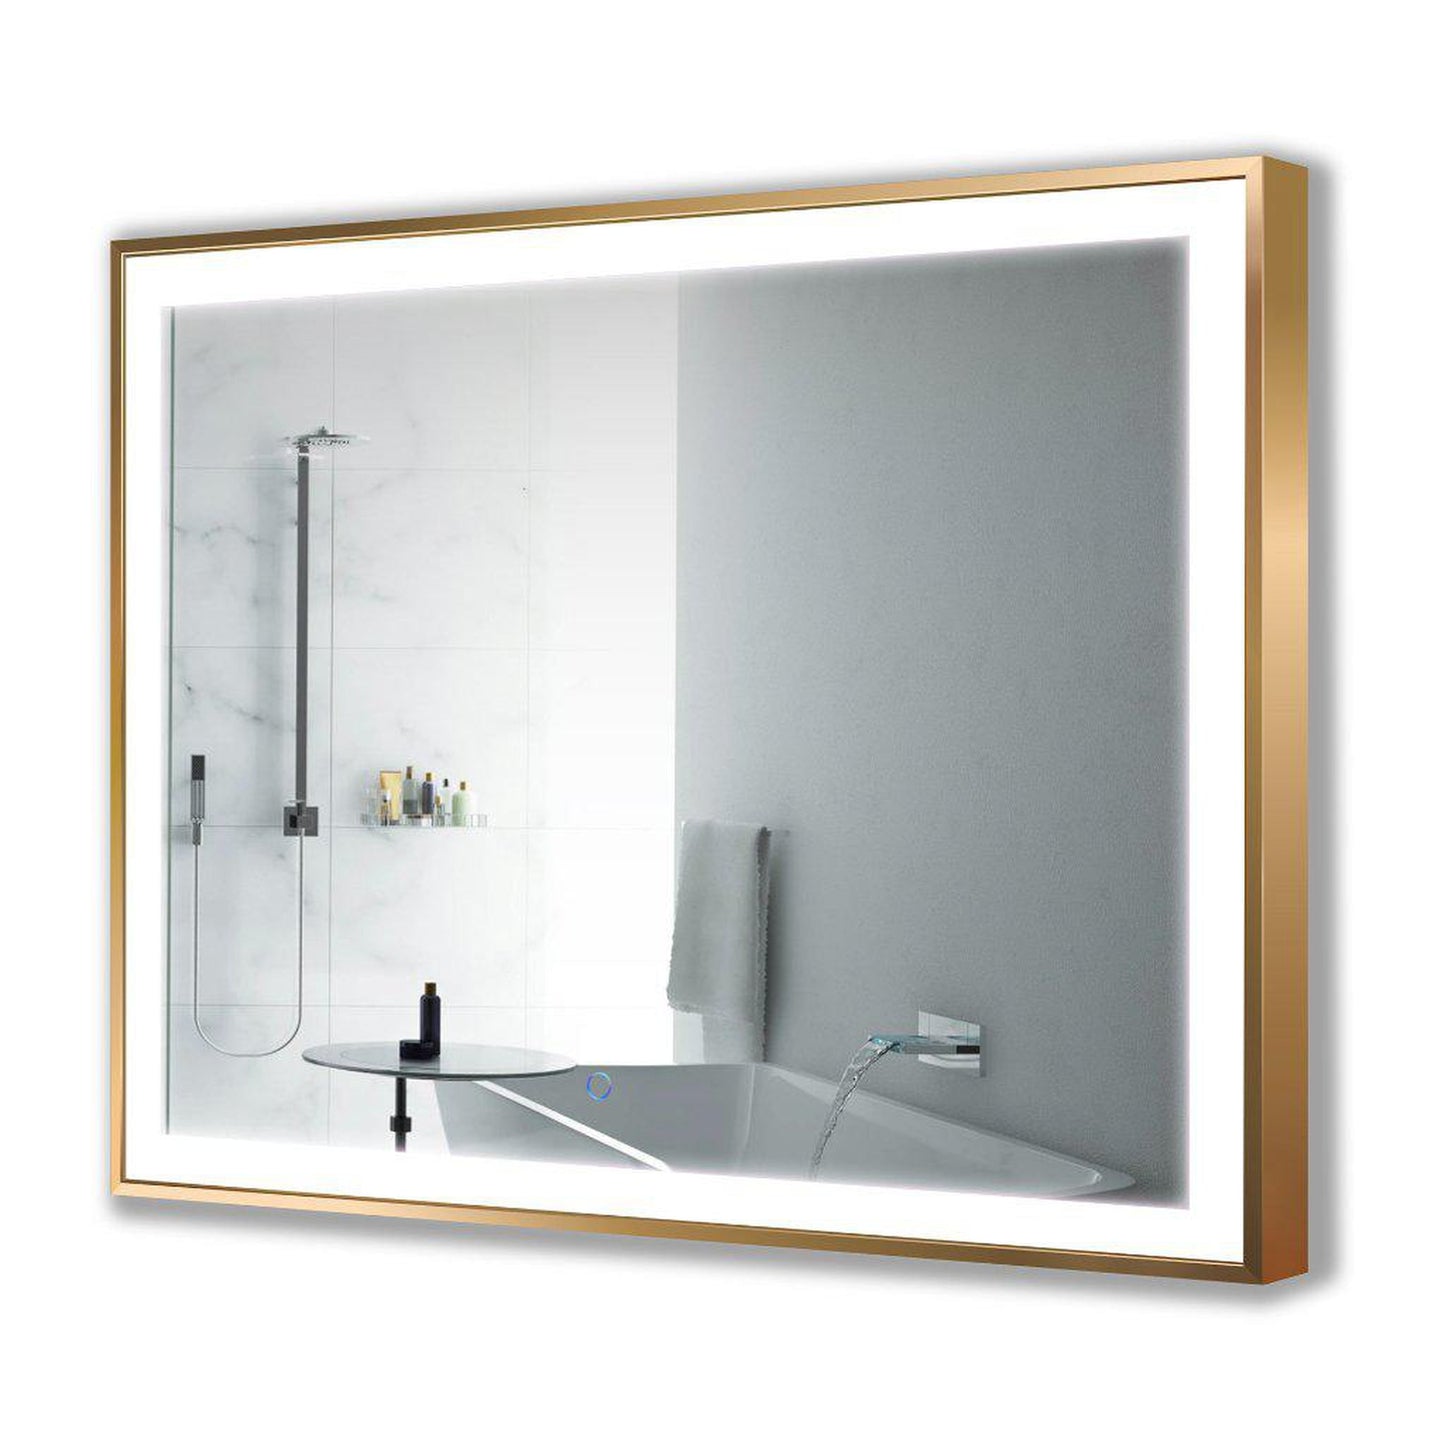 Krugg Reflections Soho 48" x 36" 5000K Rectangular Matte Gold Wall-Mounted Framed LED Bathroom Vanity Mirror With Built-in Defogger and Dimmer